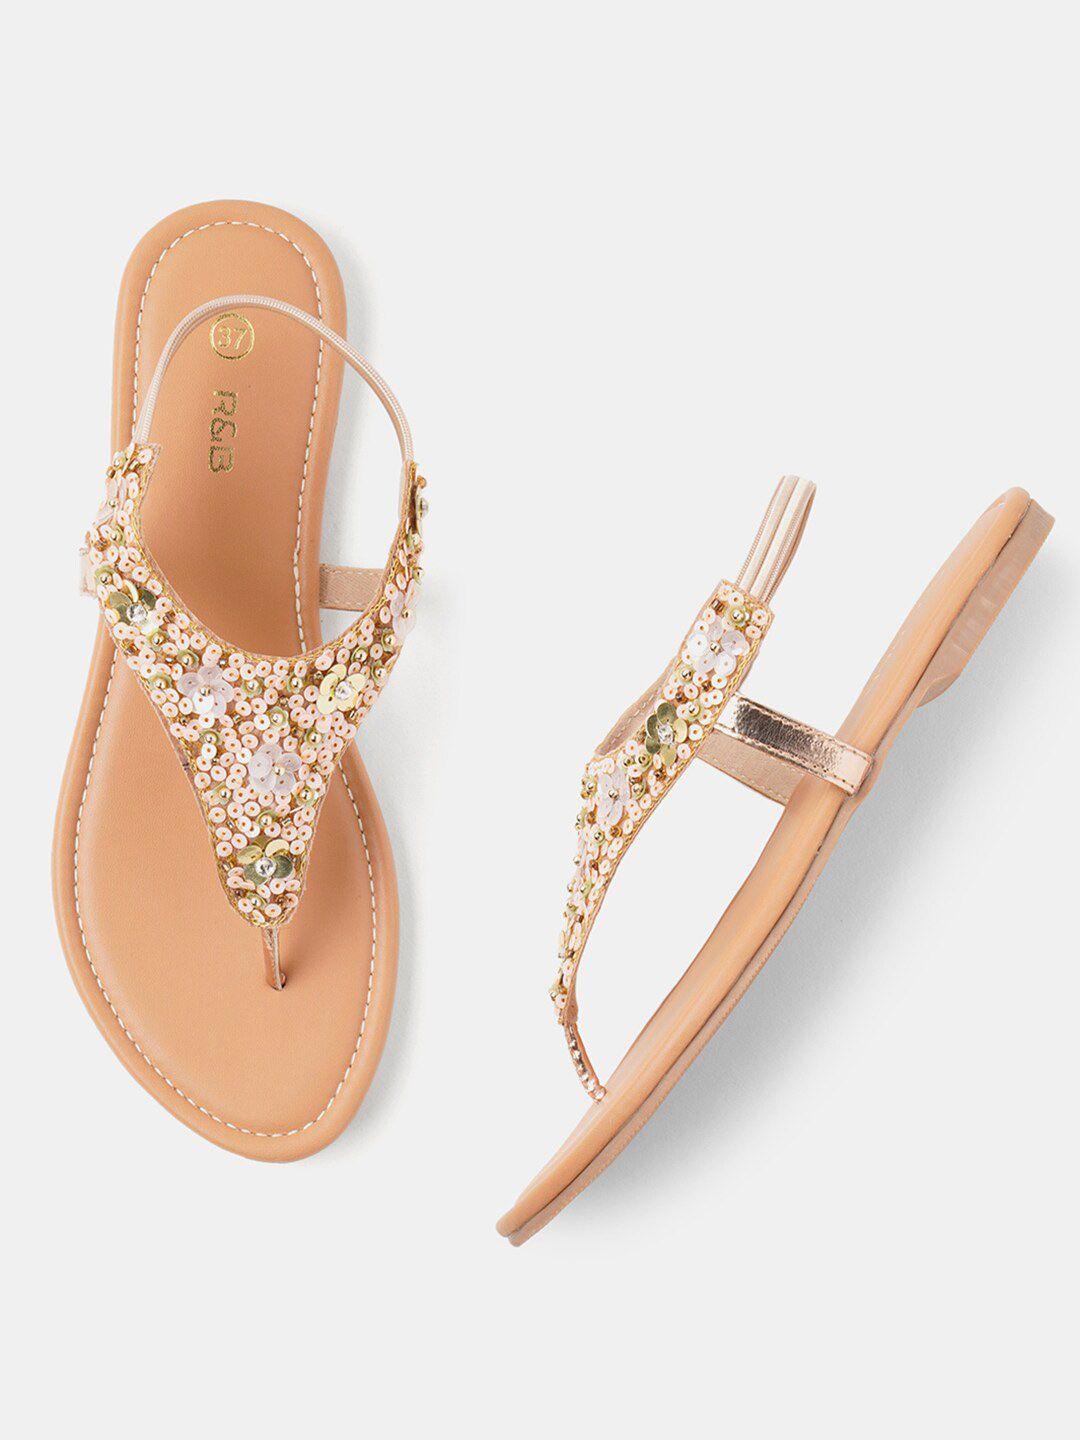 r&b sequinned embellished t-strap flats with backstrap